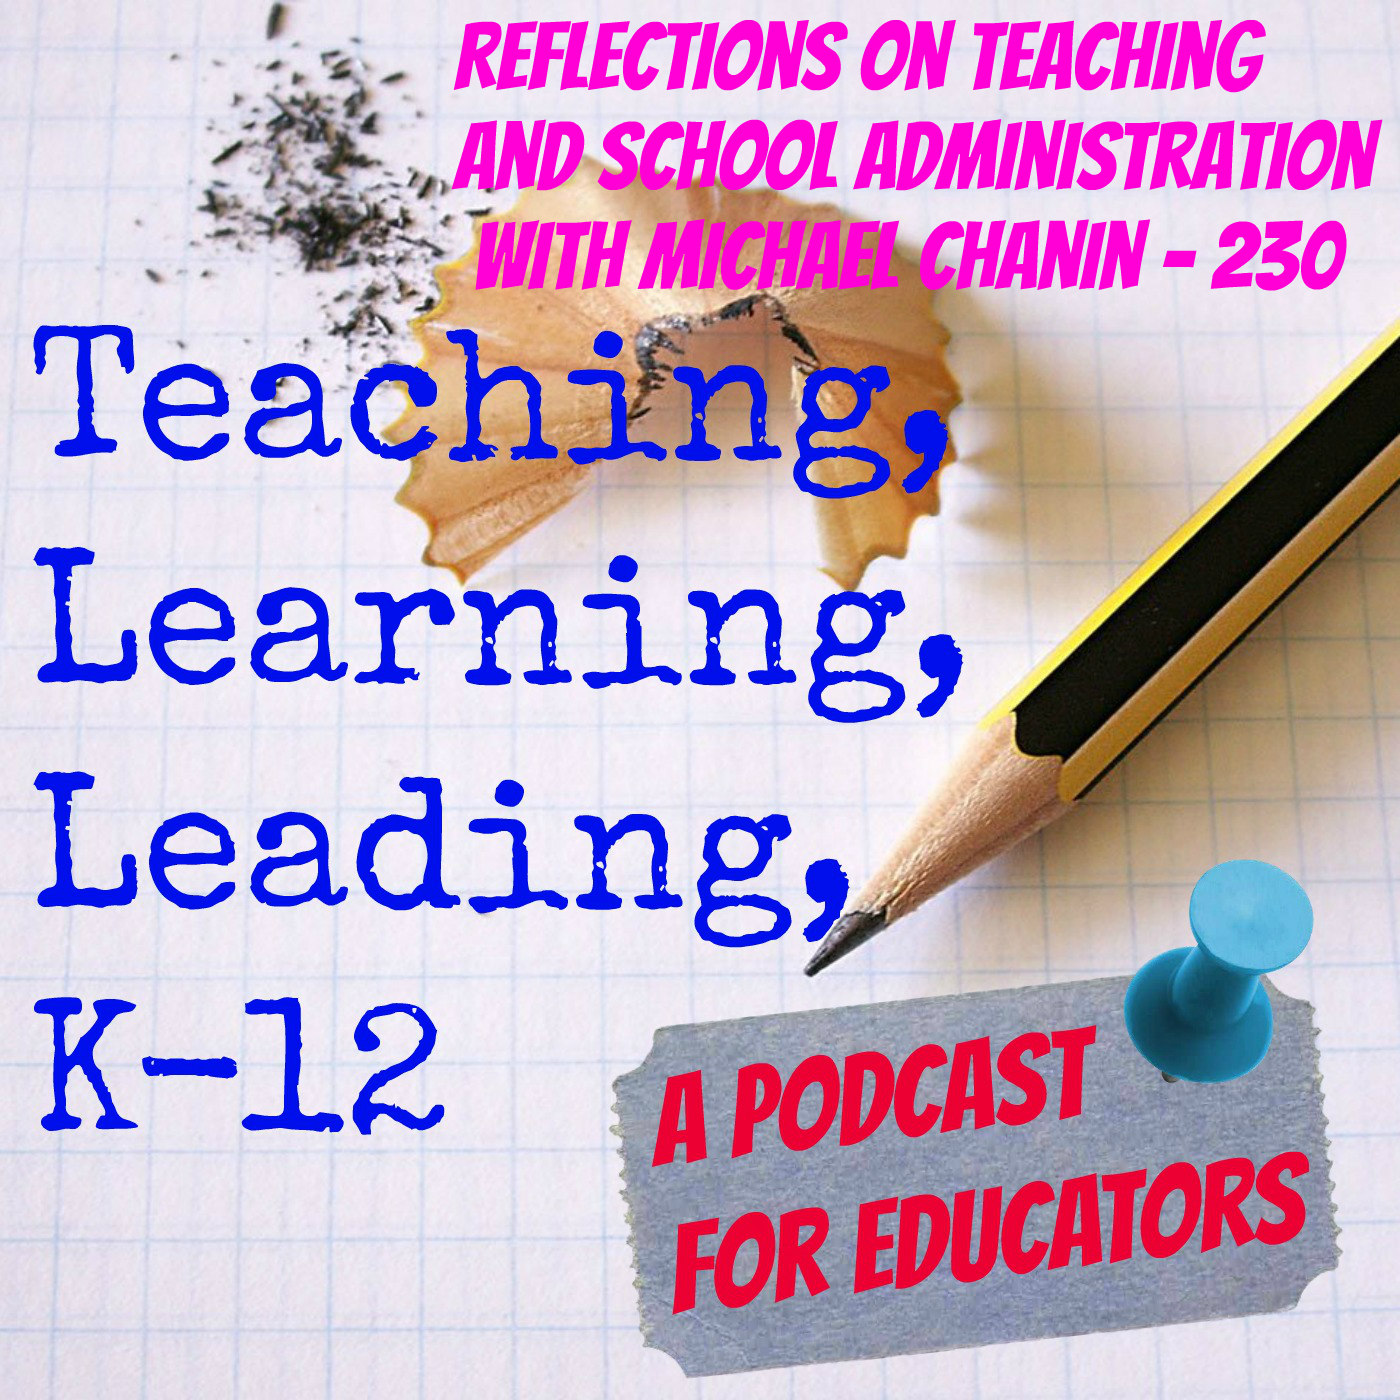 Reflections on Teaching and School Administration with Michael Chanin - 230 Image